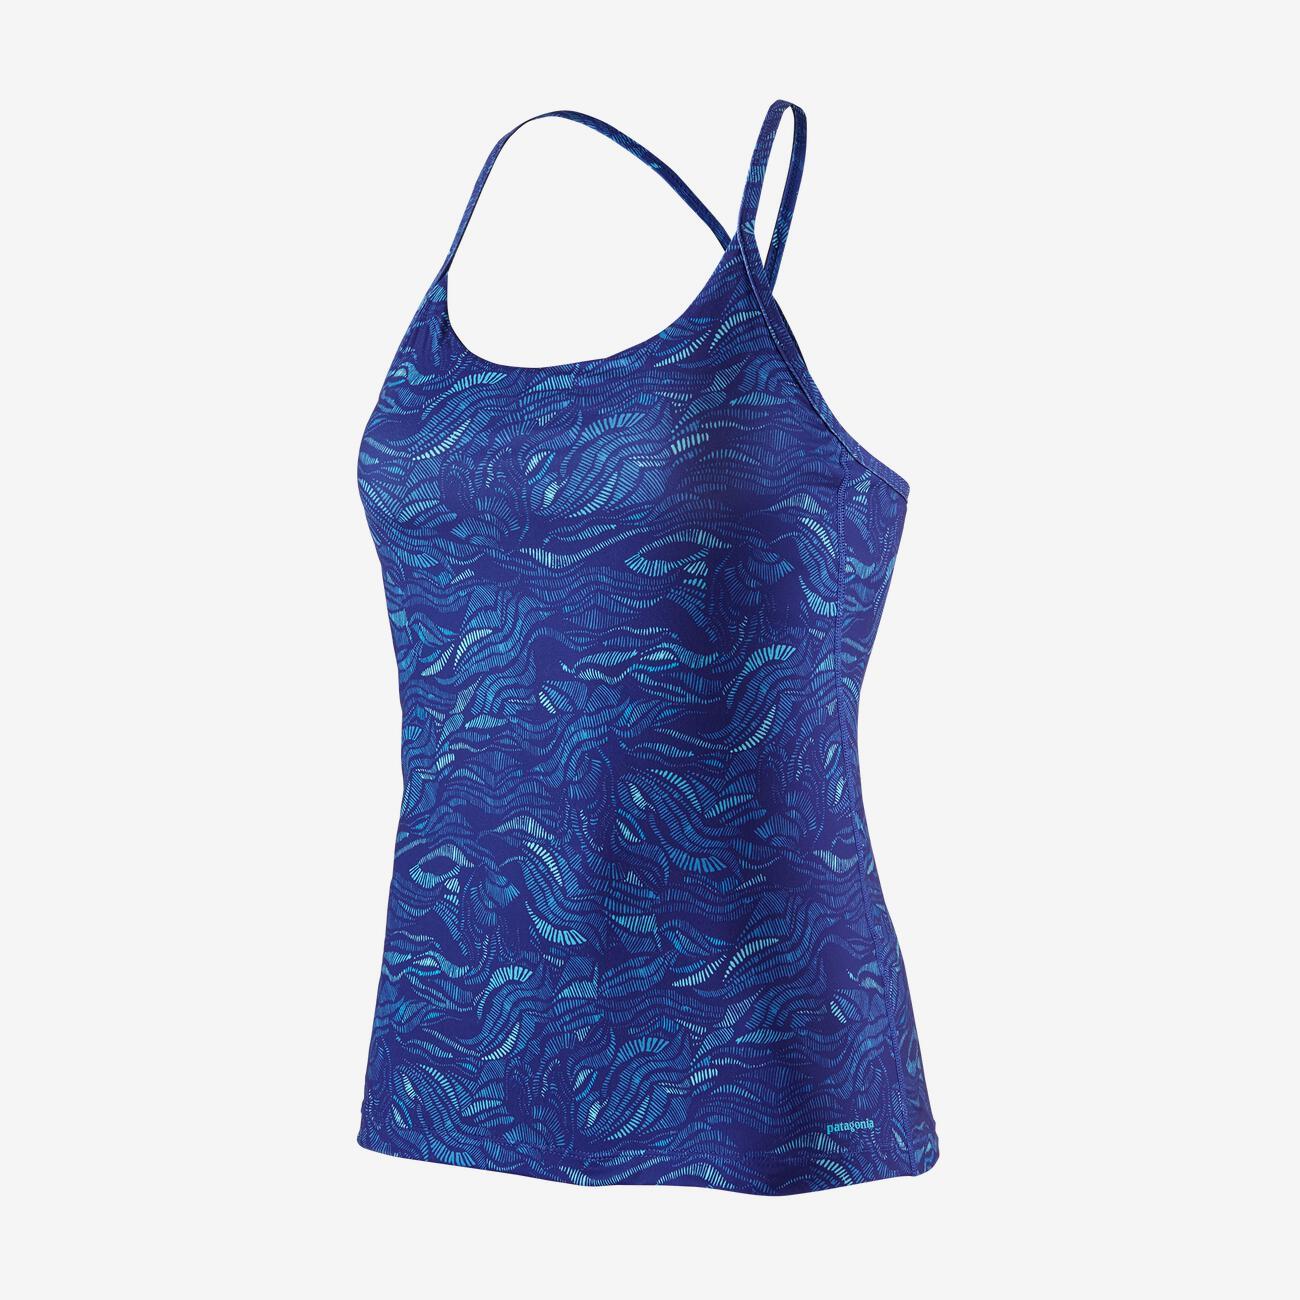 Patagonia Cross Beta Tank Top - Recycled Polyester Mississippi Delta: Cobalt Blue Shirt